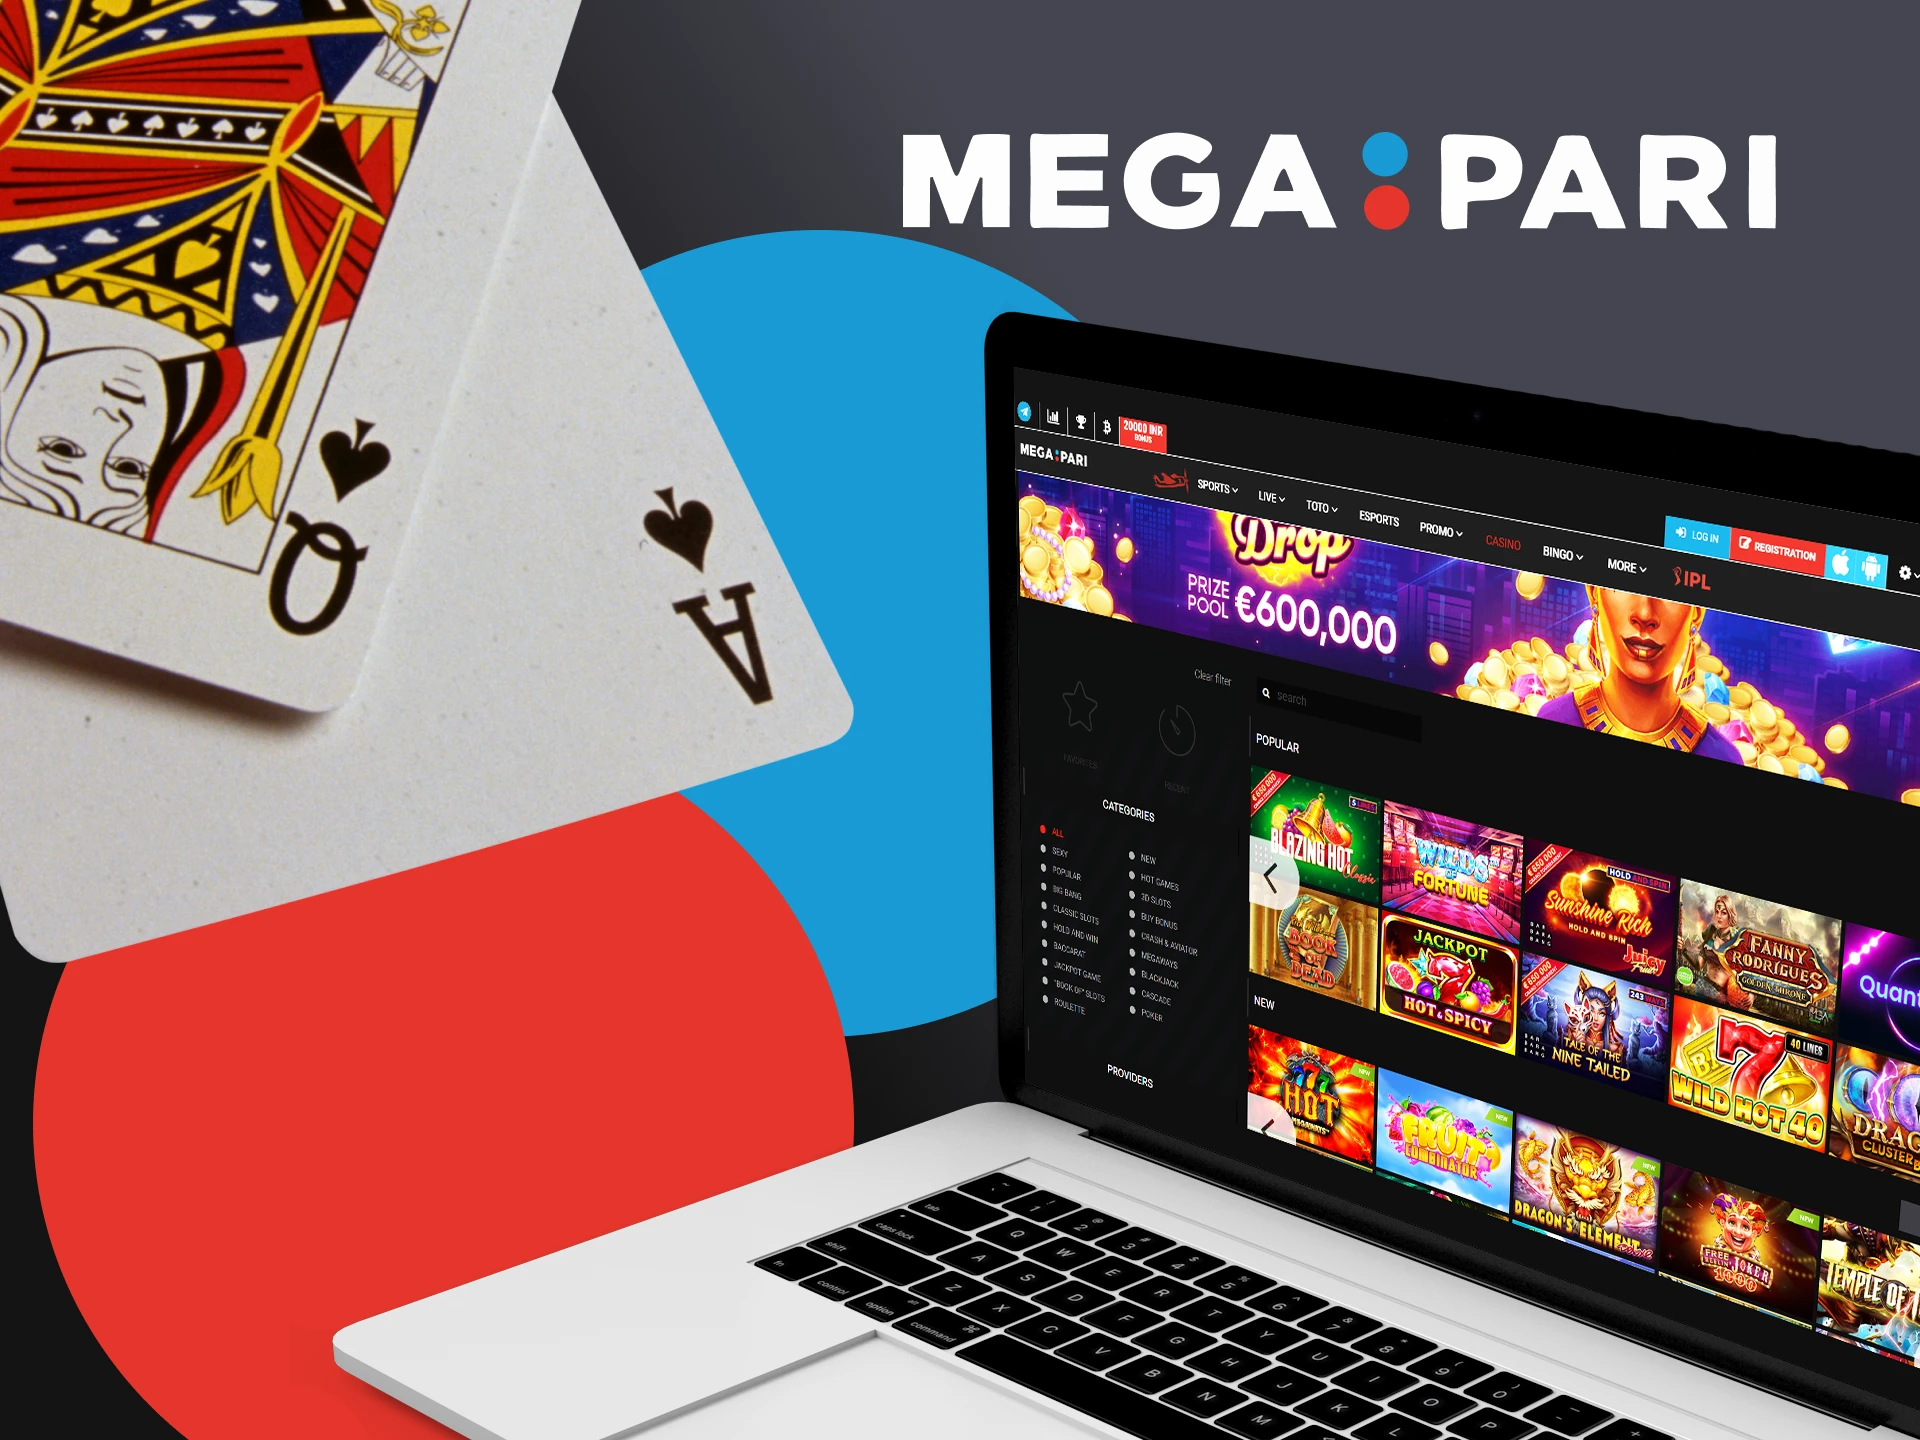 Go to the desired section of Megapari to play at Live Casino.